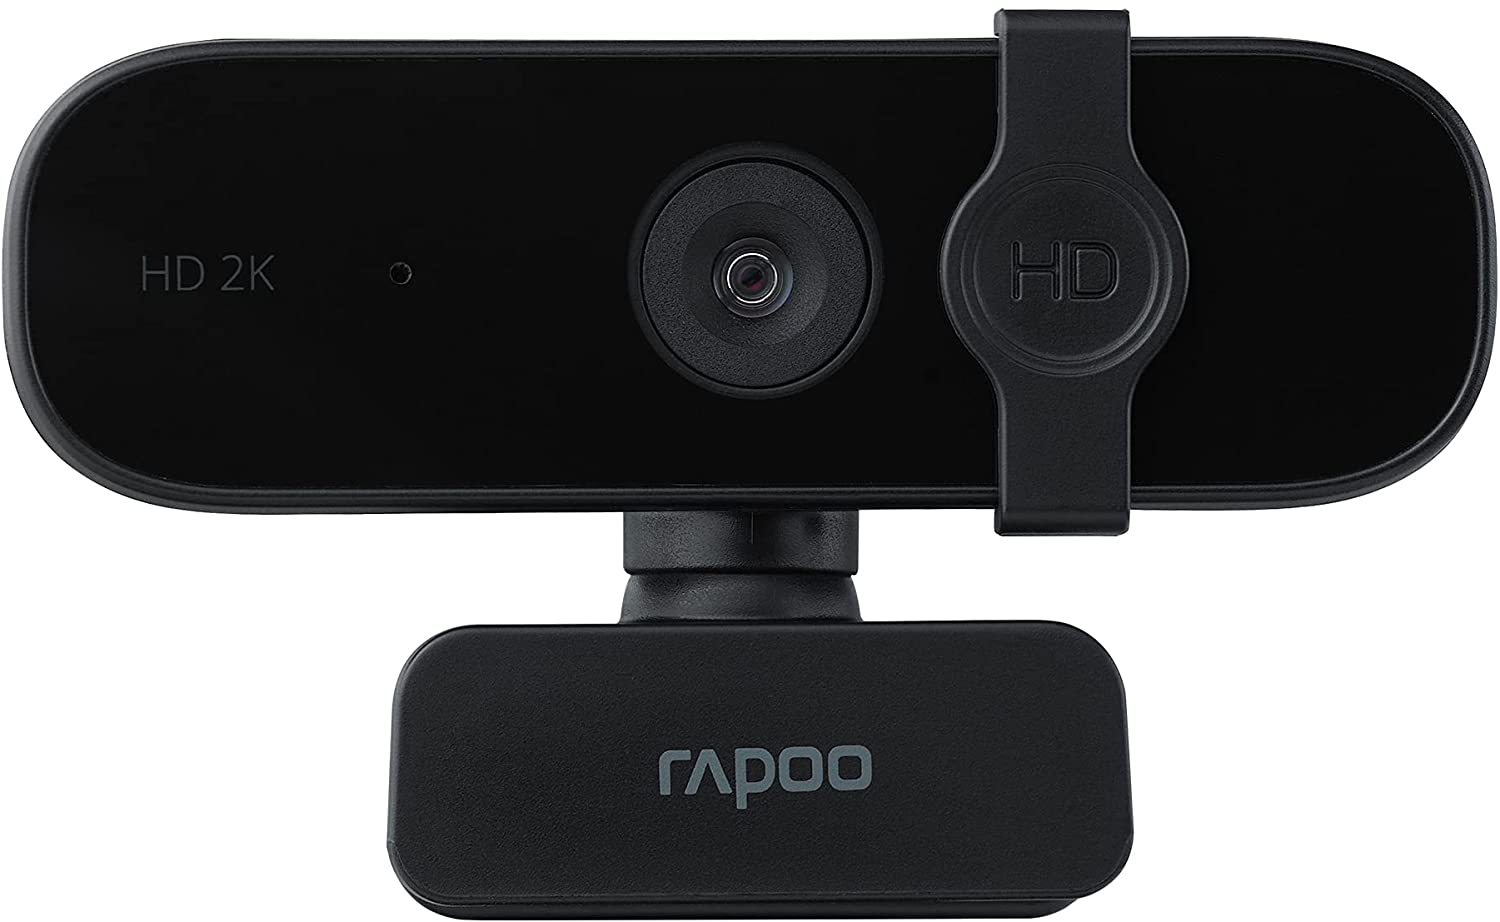 Rapoo XW2K Full HD Webcam 2K (4MP) 85 Field of View Fixed Focus Noise Cancelling USB Port Camera